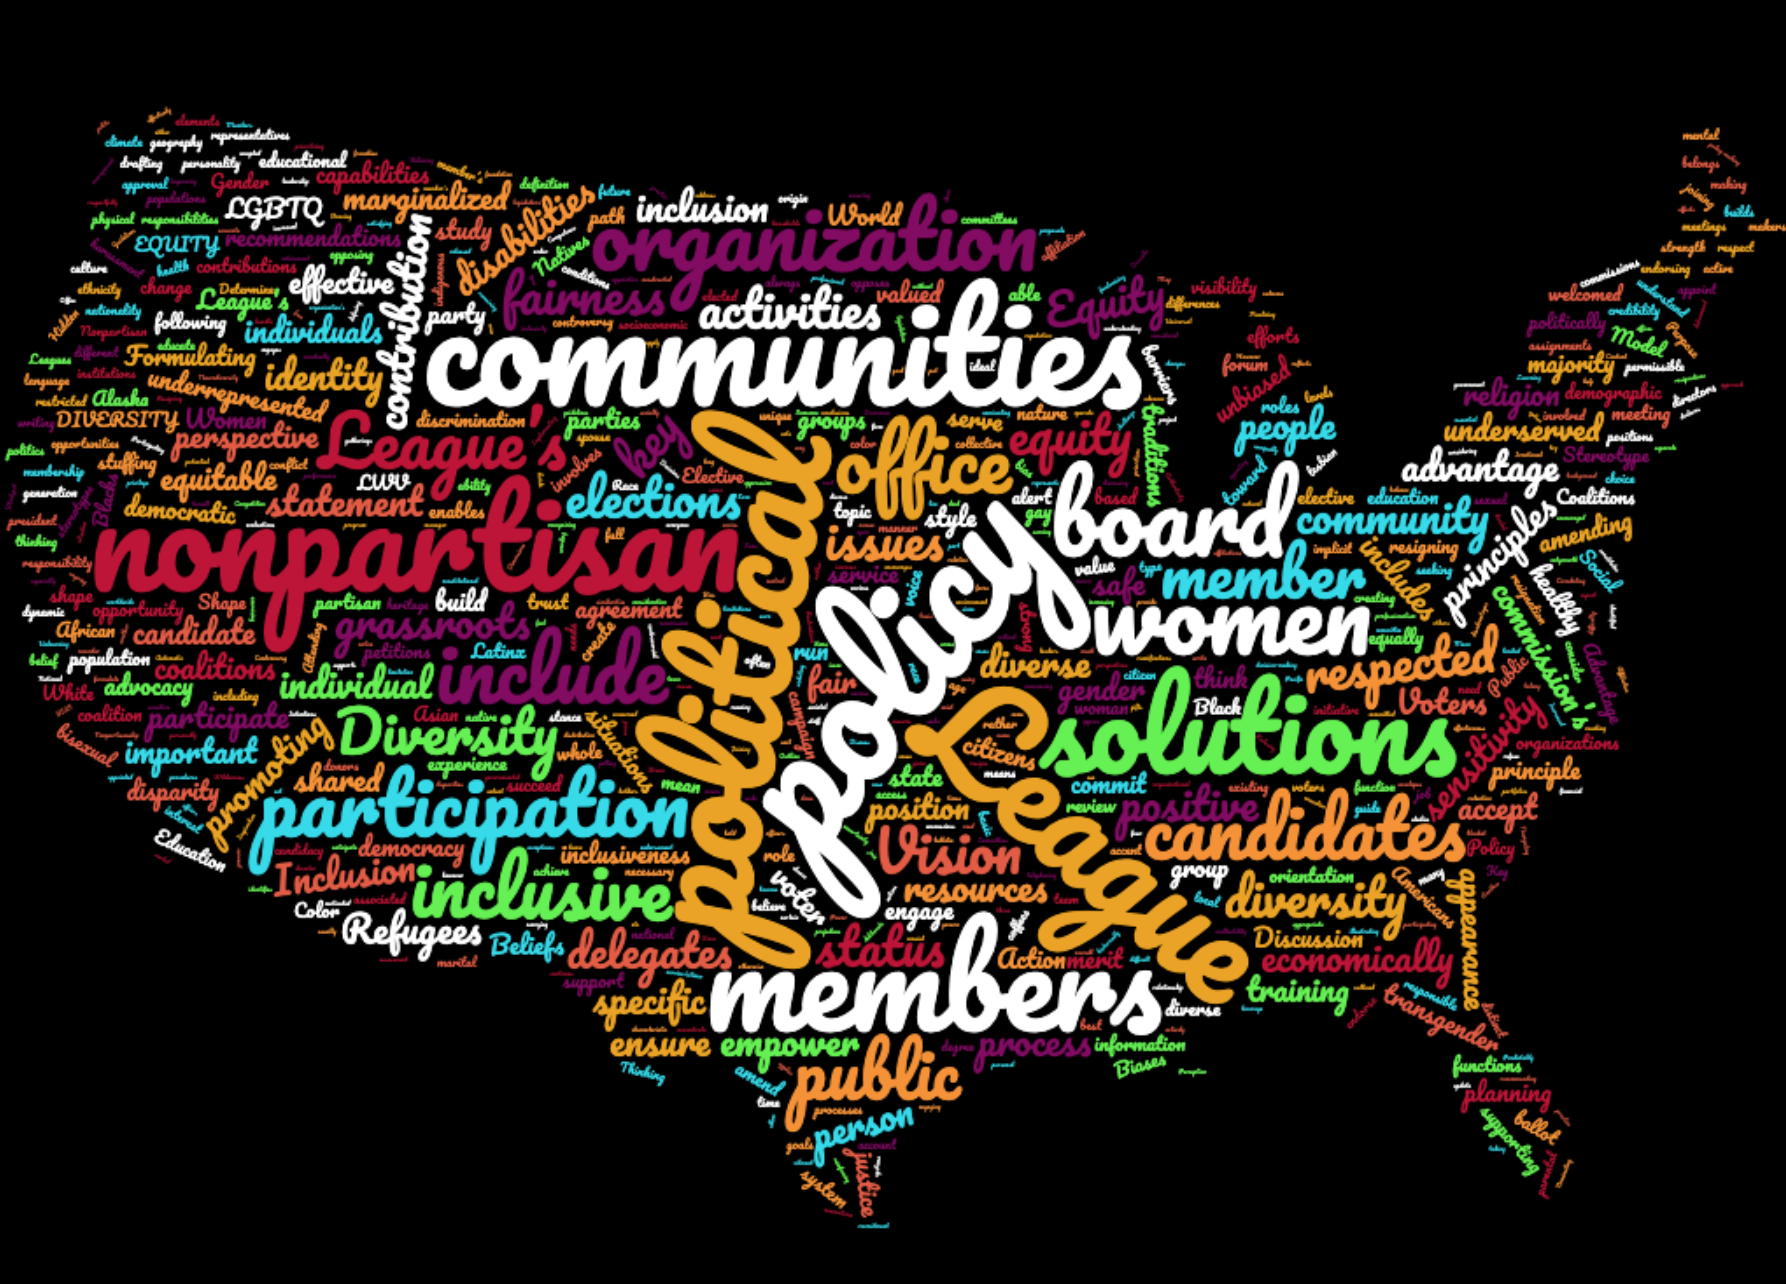 word cloud picture of League vision, beliefs, values, in a map of the US